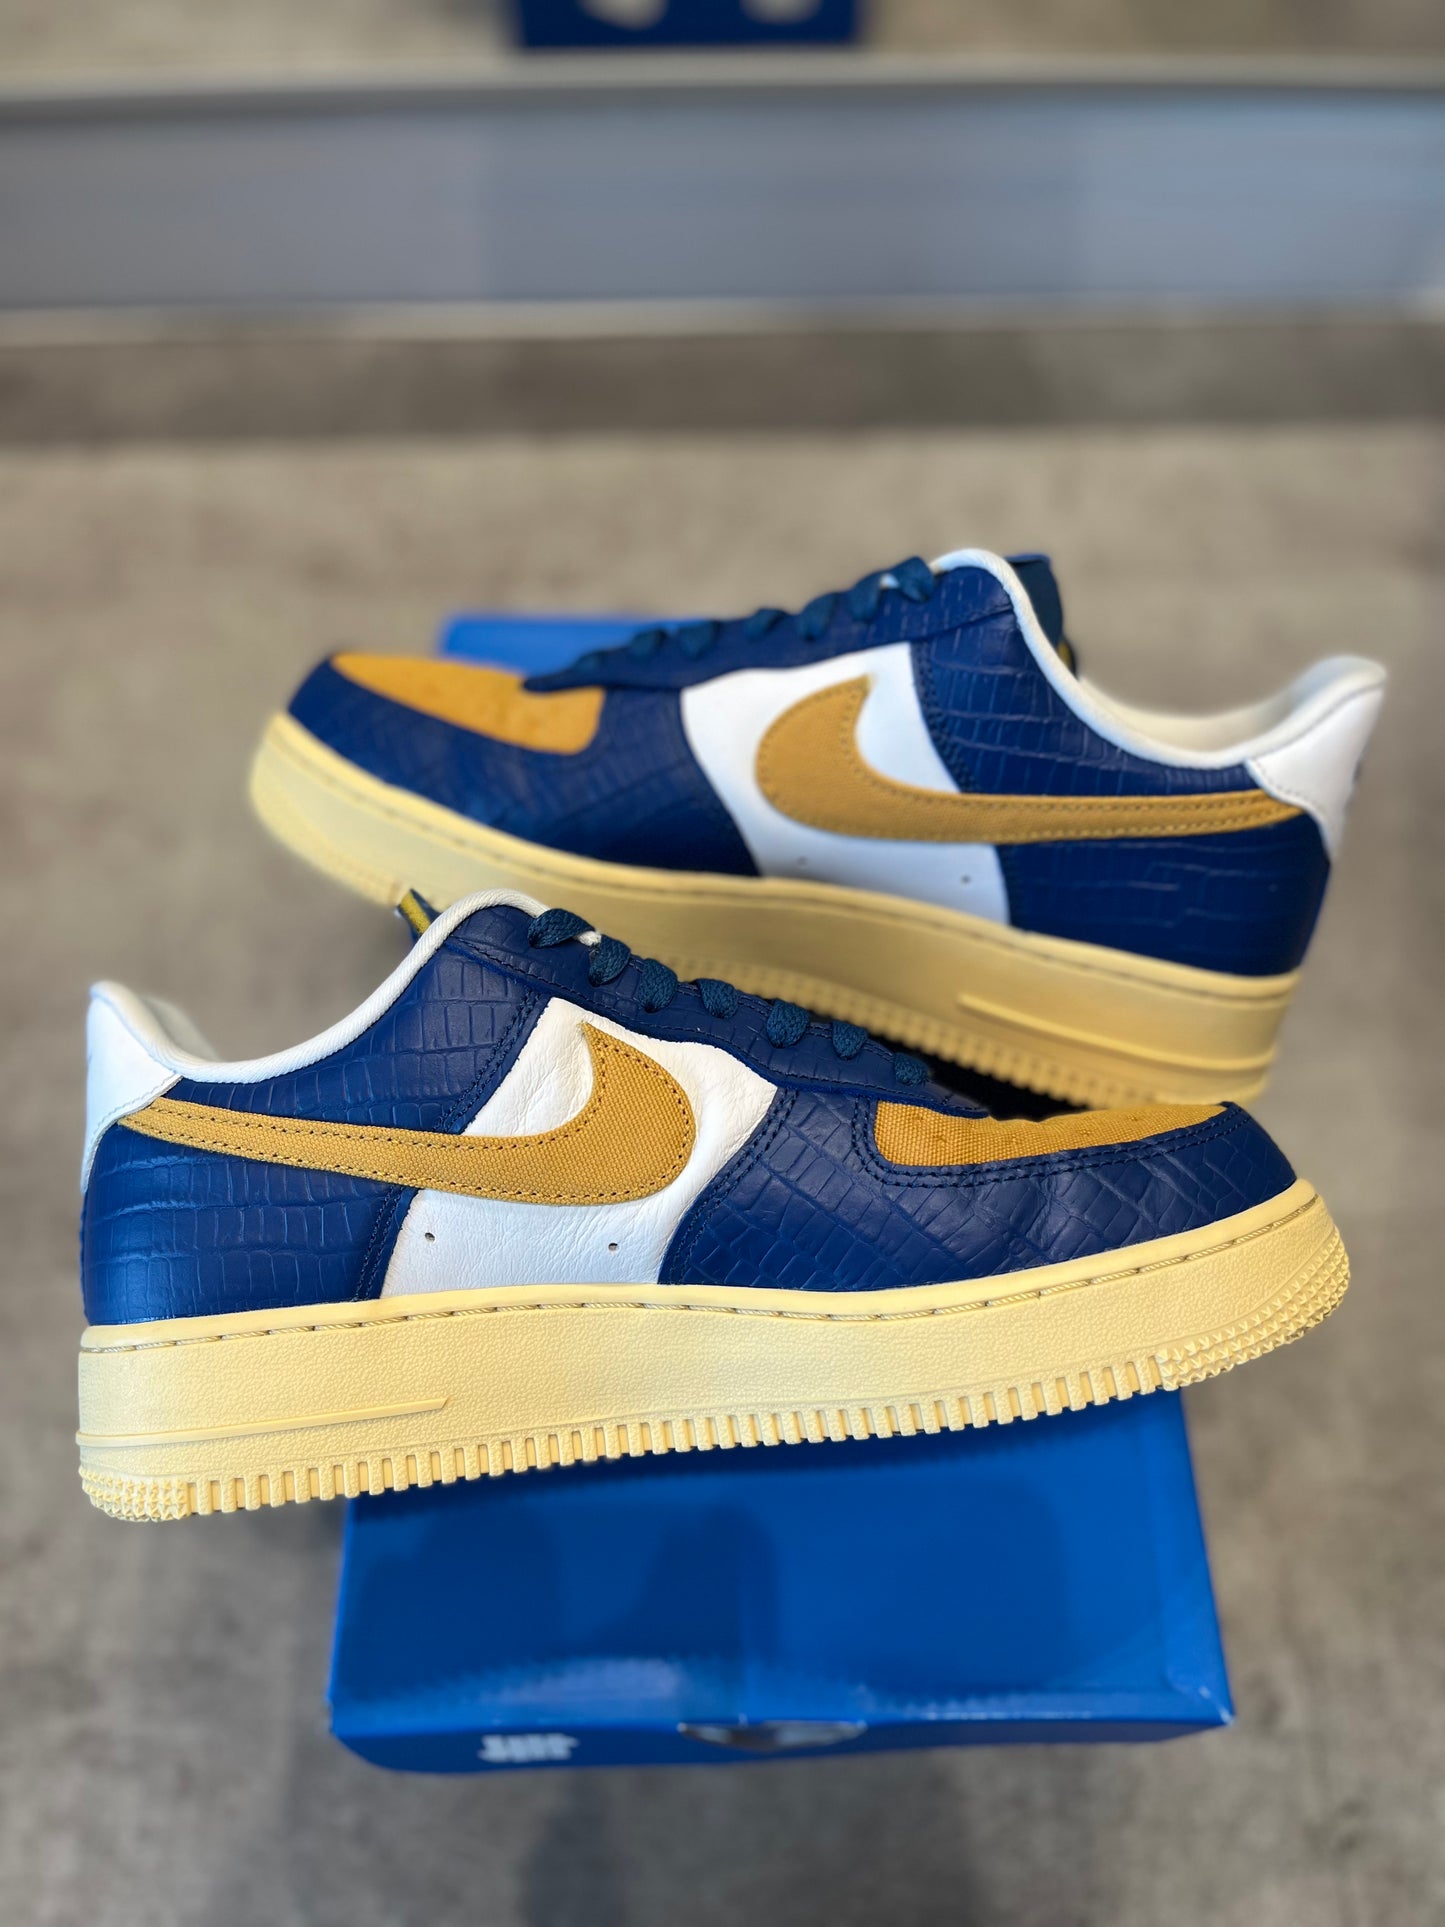 Nike Air Force 1 Low Undefeated On It Blue Yellow Croc (Preowned)